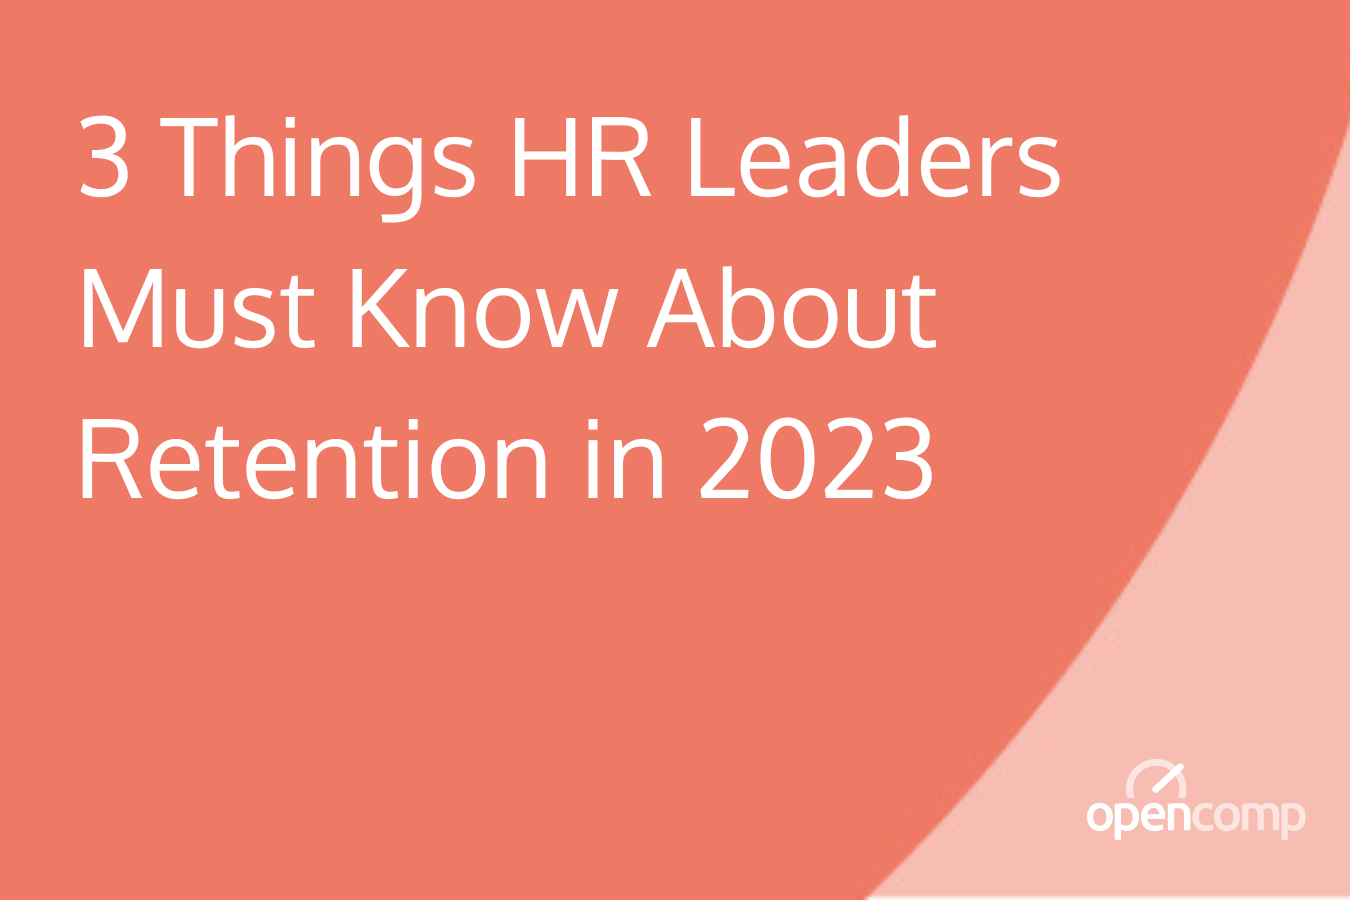 3 Things HR Leaders Must Know About Retention in 2023